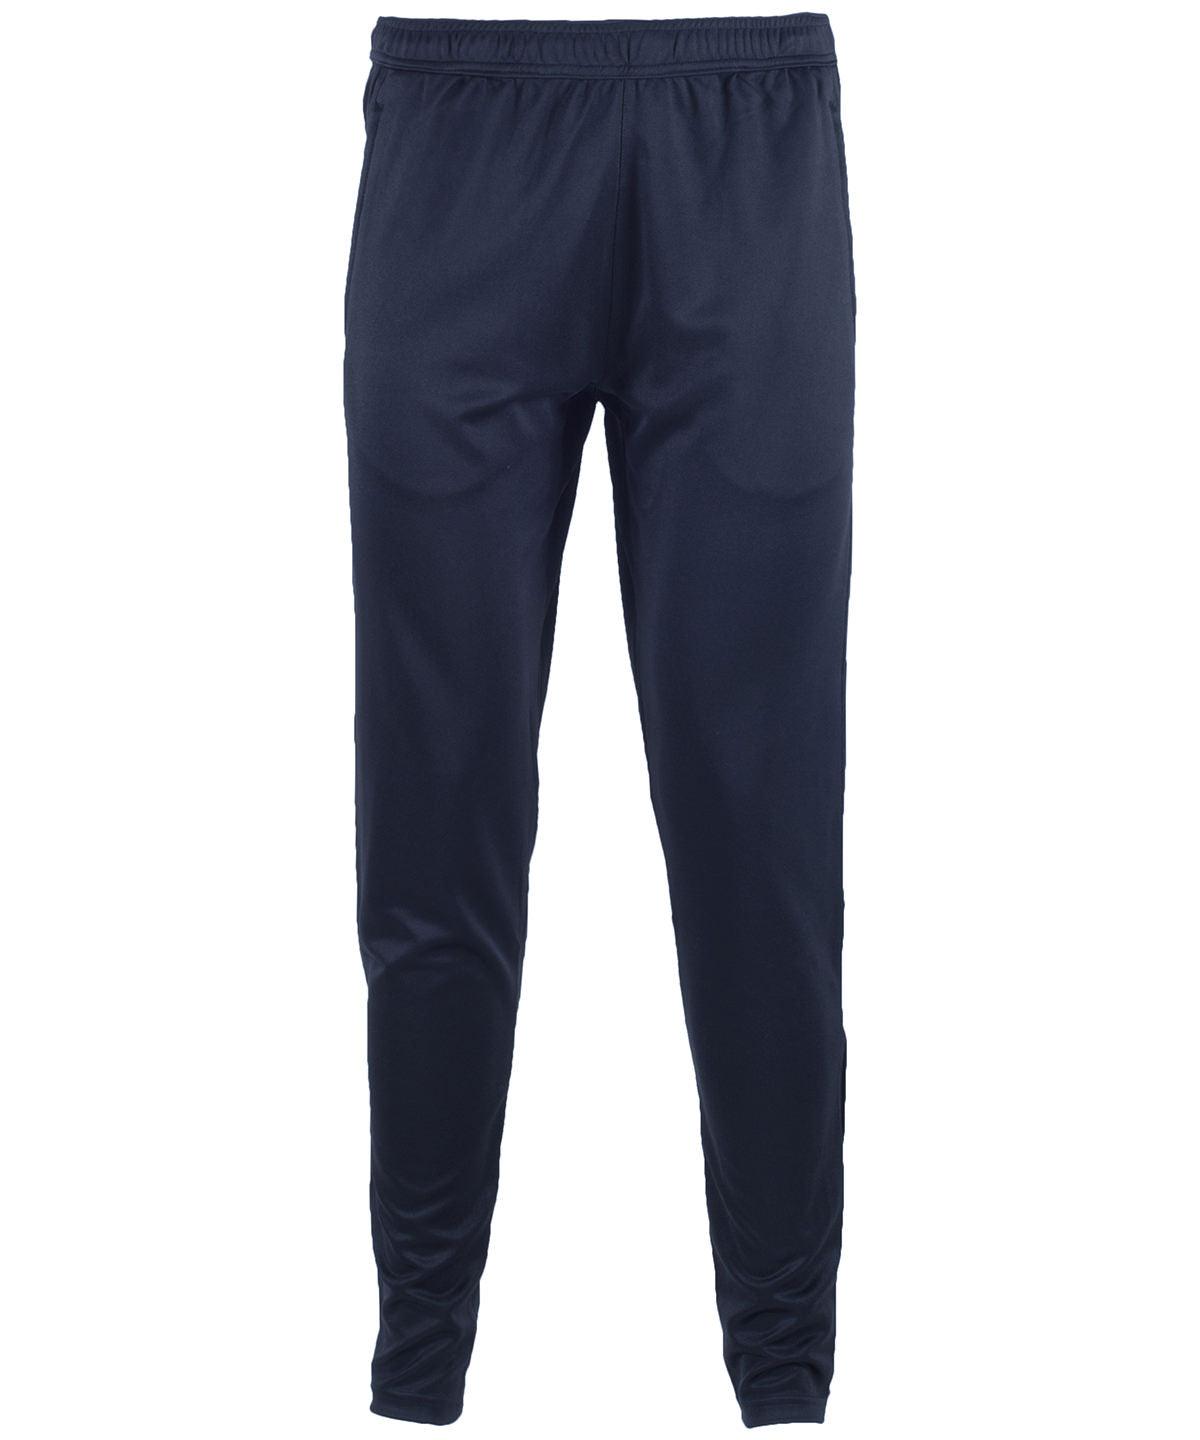 Navy - Slim leg training pants Trousers Tombo Activewear & Performance, Athleisurewear, Must Haves, Sports & Leisure, Street Casual, Tracksuits, Trousers & Shorts Schoolwear Centres